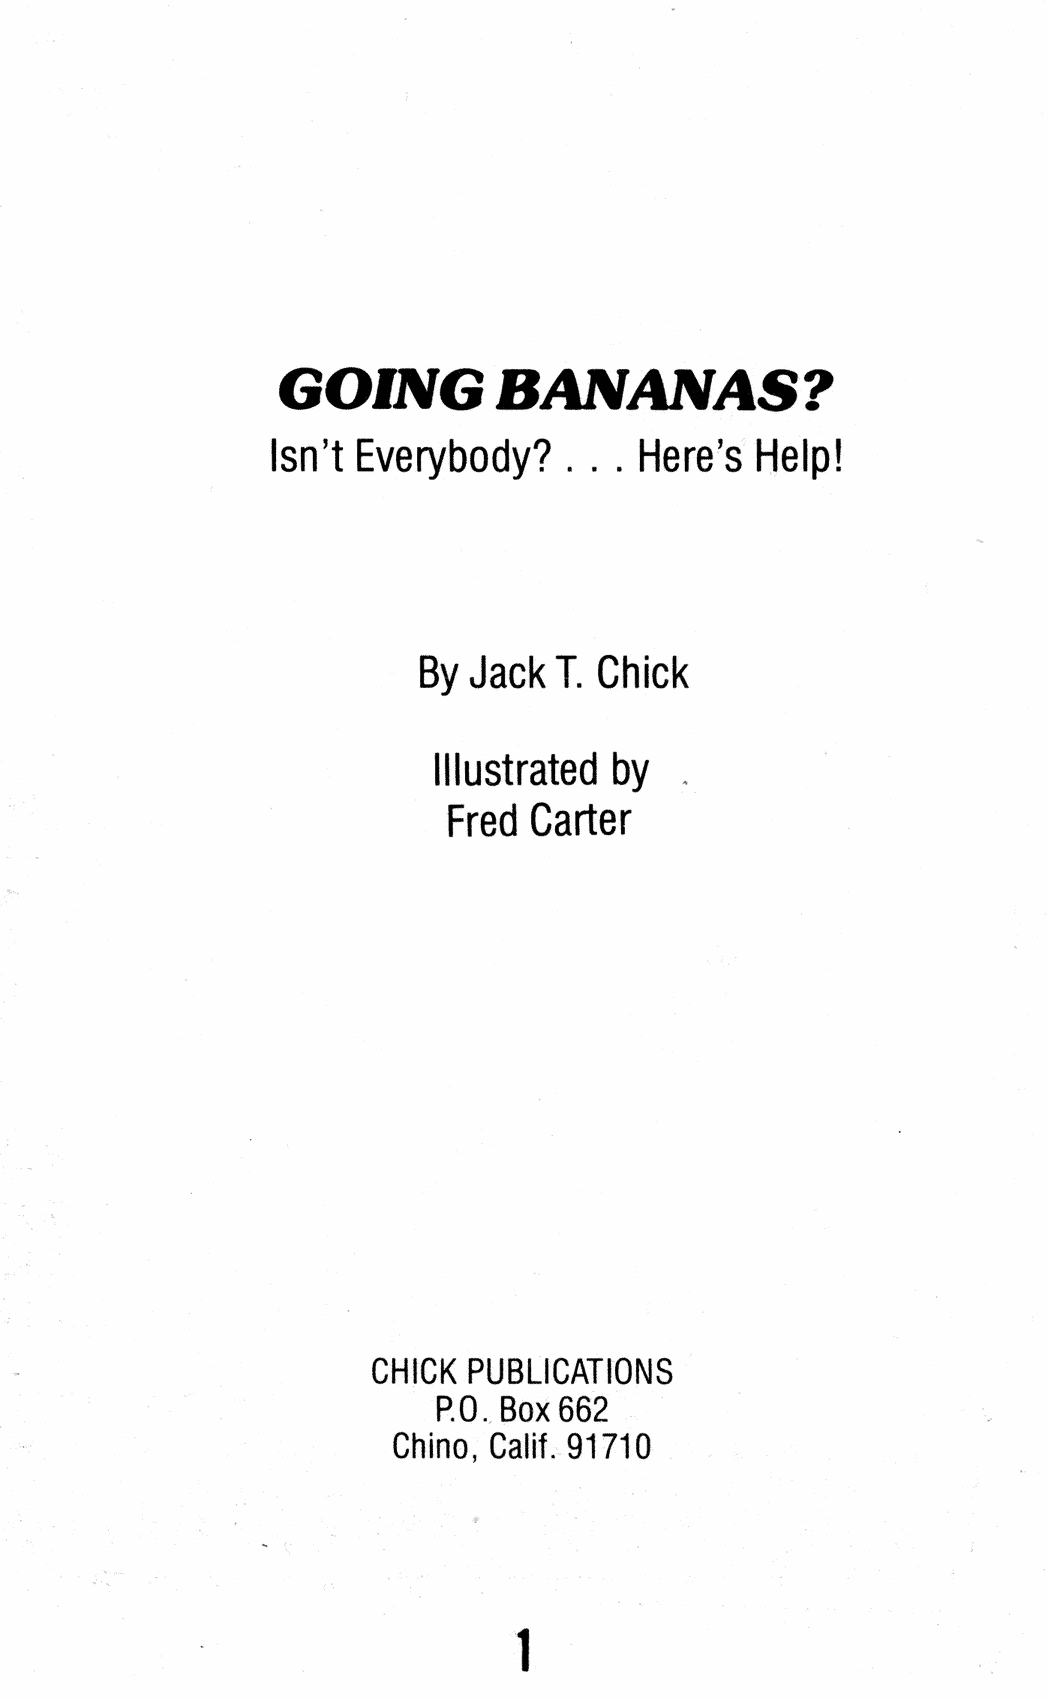 Read online Going bananas? comic -  Issue # TPB (Part 1) - 3